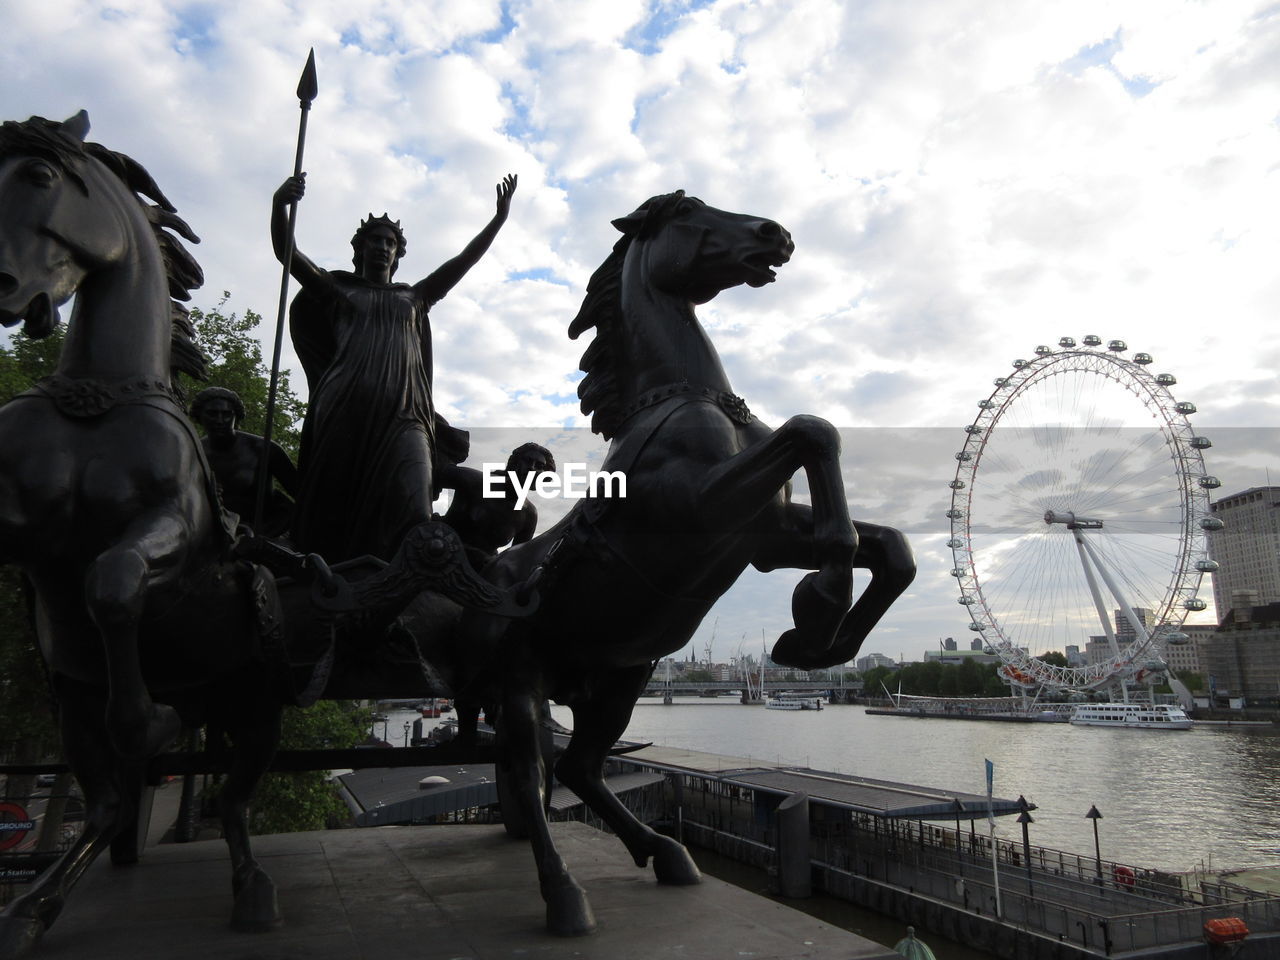 Statue of boudicca and london eye in background